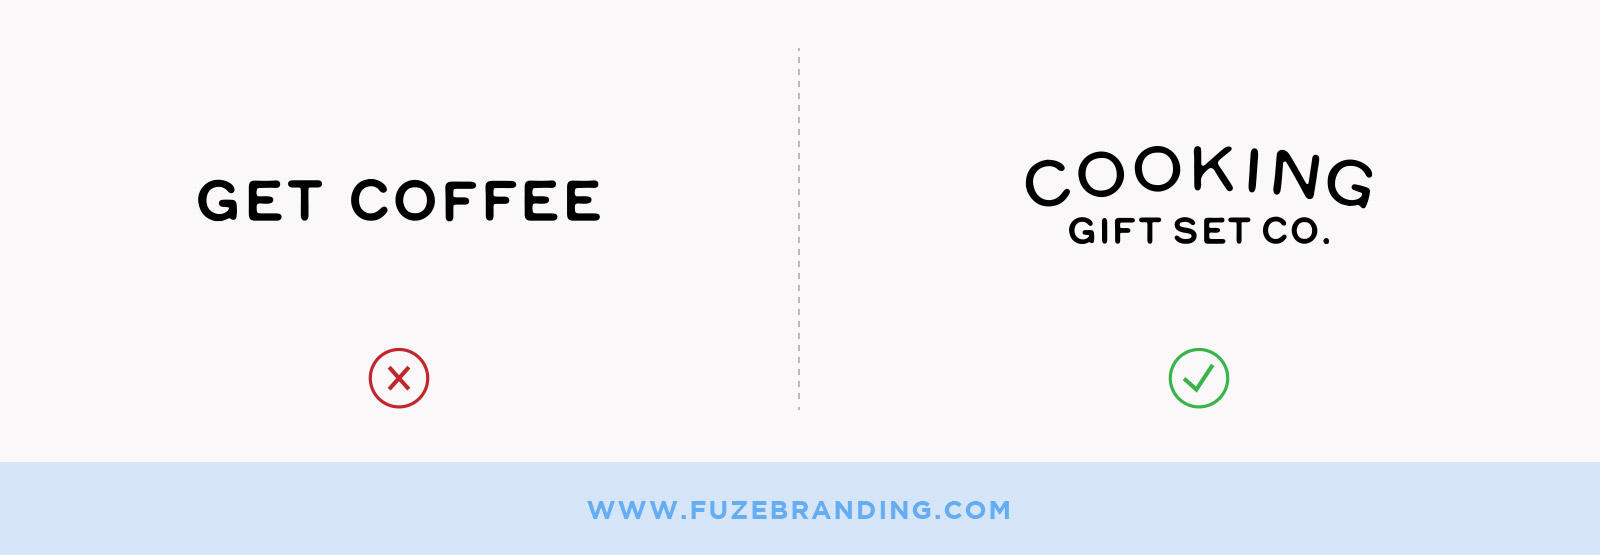 Fuze-Branding-Small-Business-Logo-Design-Mistakes-Matching-Font-Family